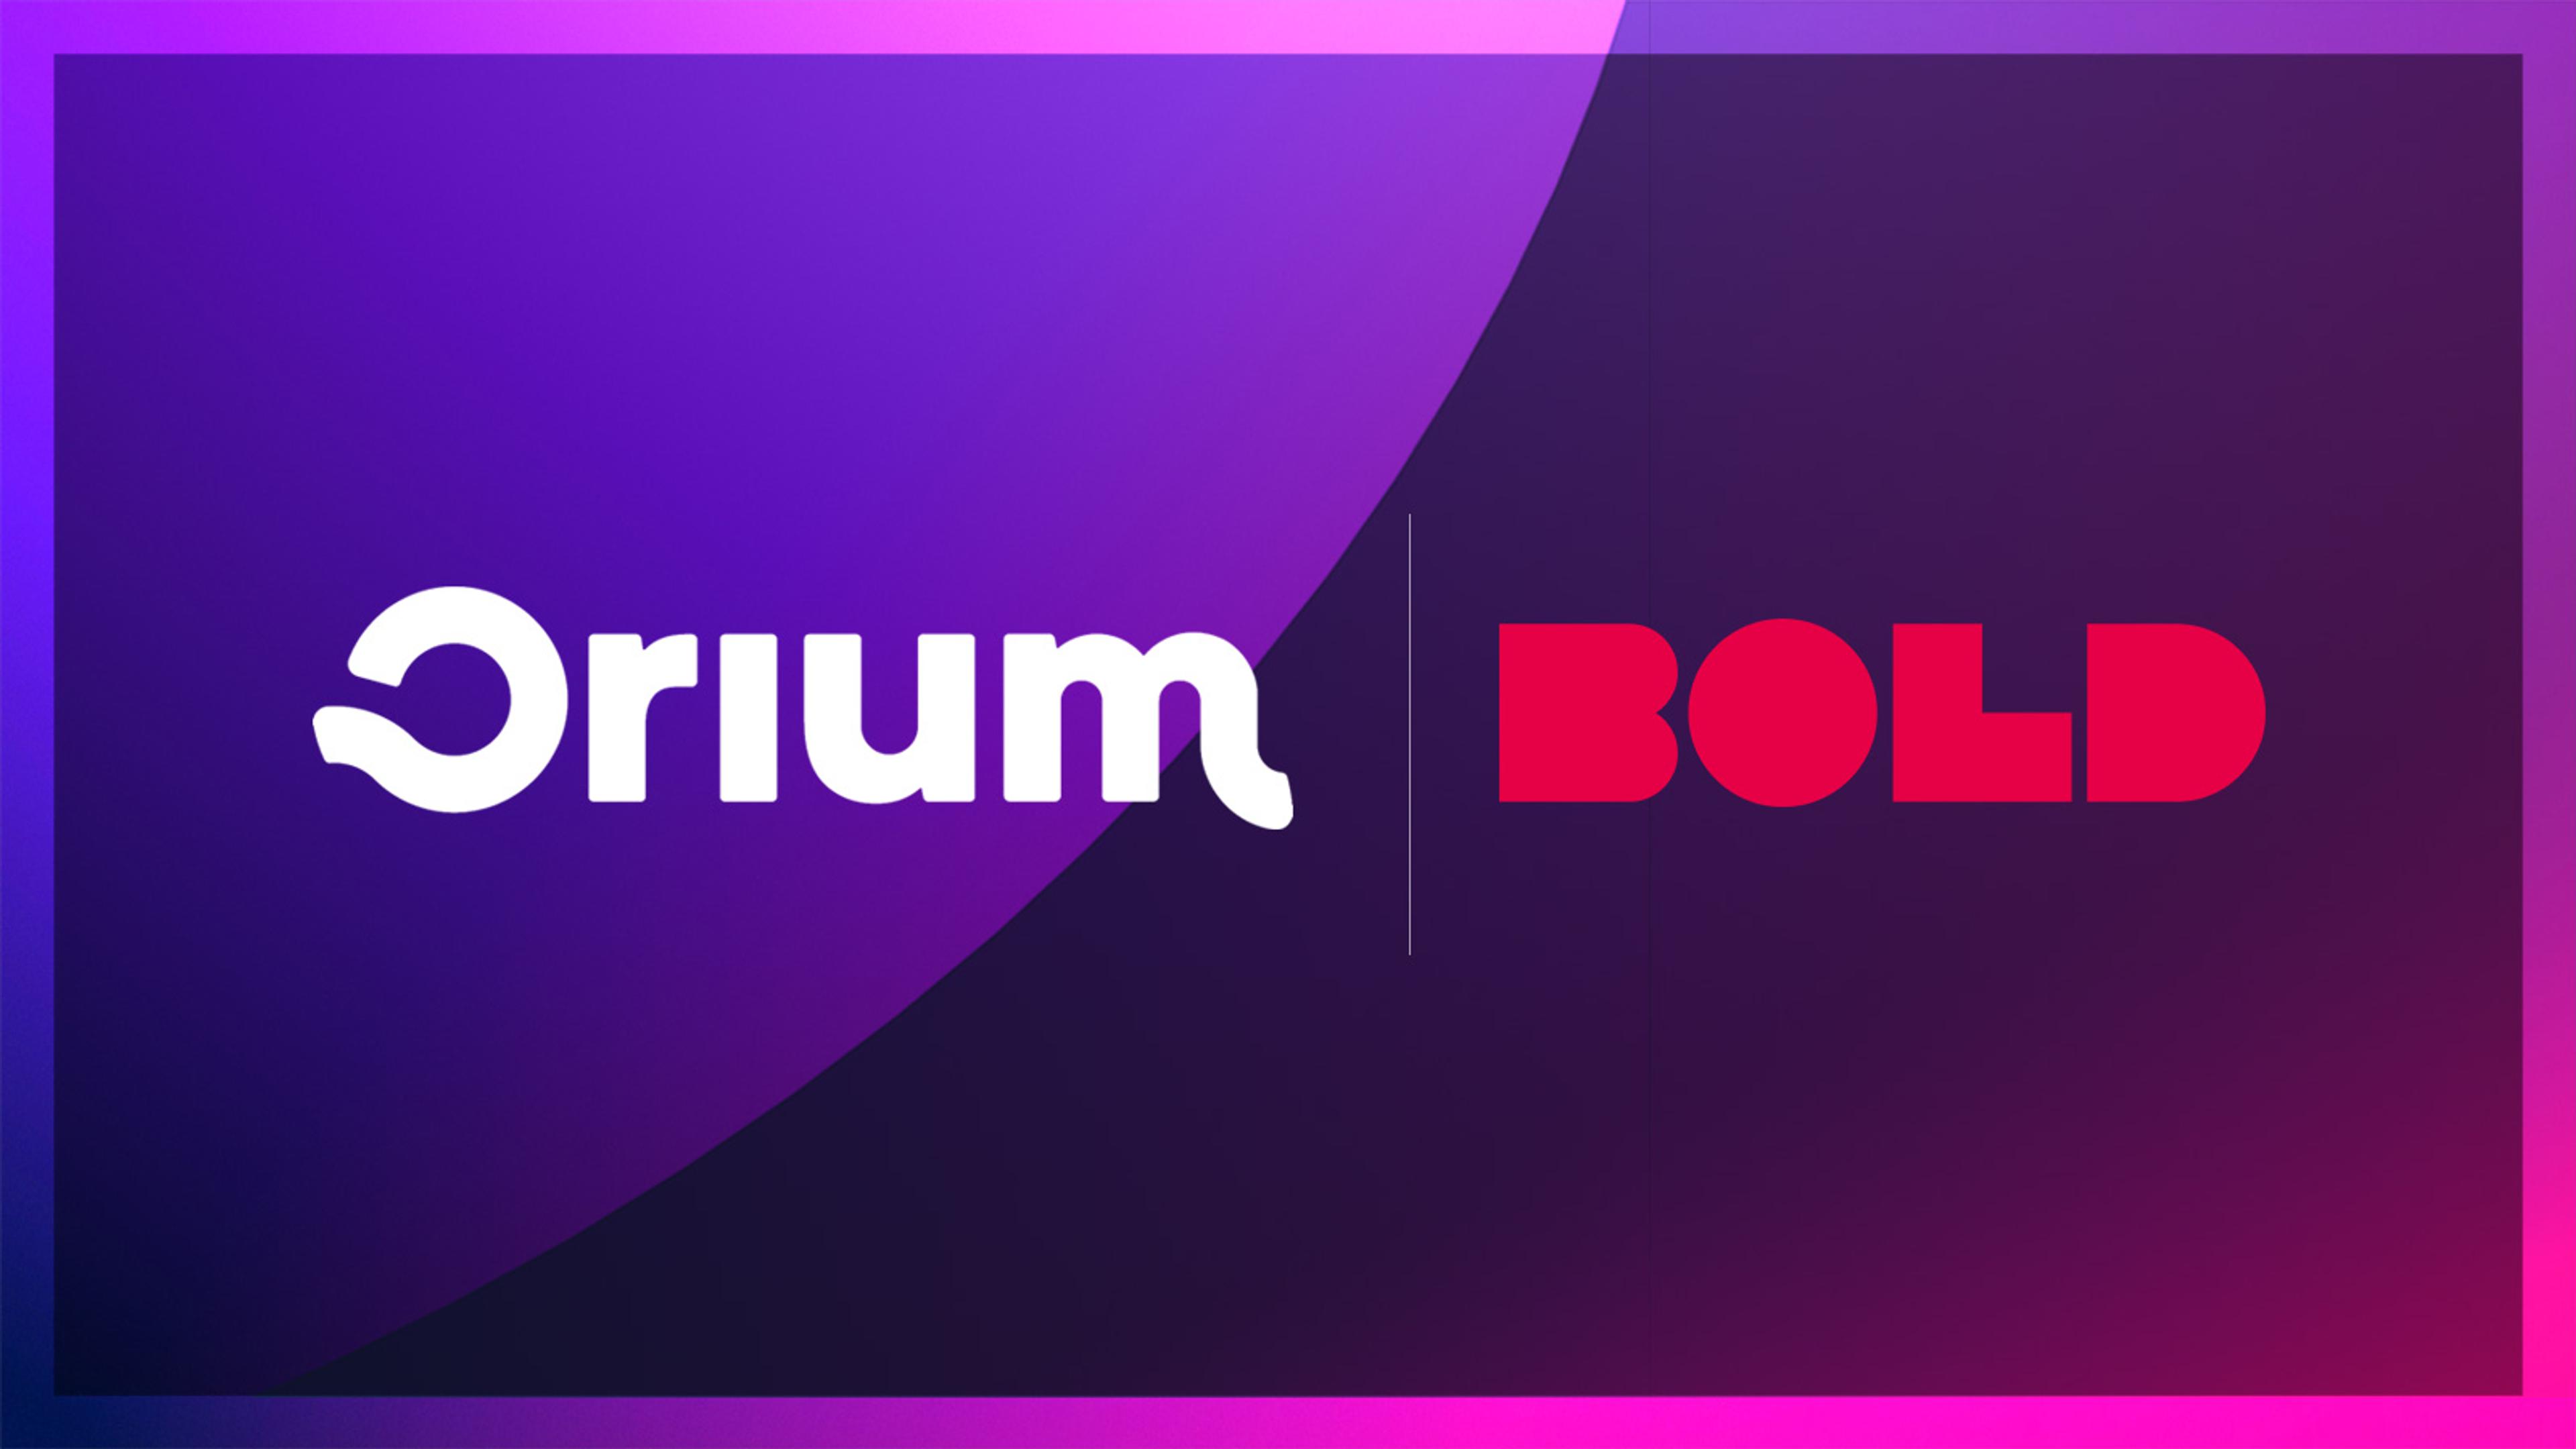 Orium logo and Bold Commerce logo side by side 